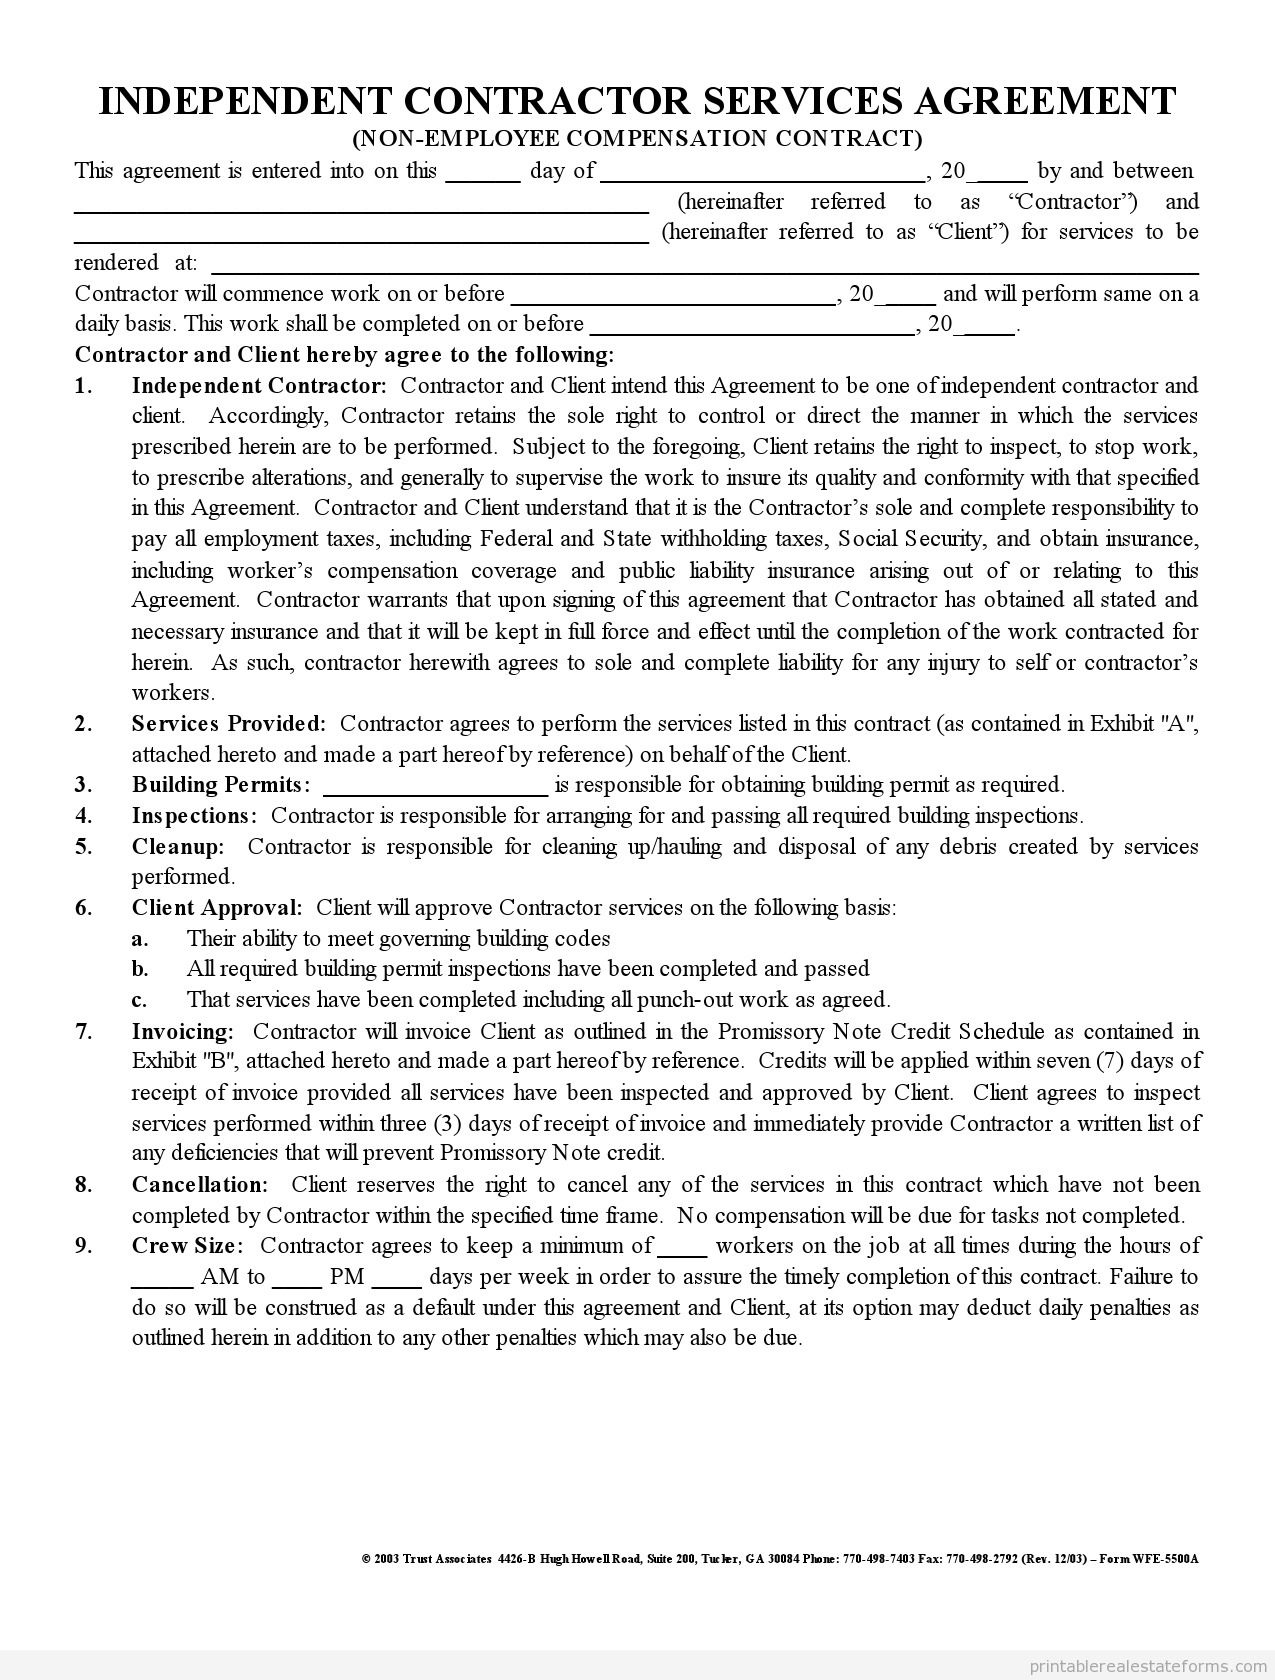 Free Printable Independent Contractor Agreement Form | Printable - Free Printable Service Contract Forms